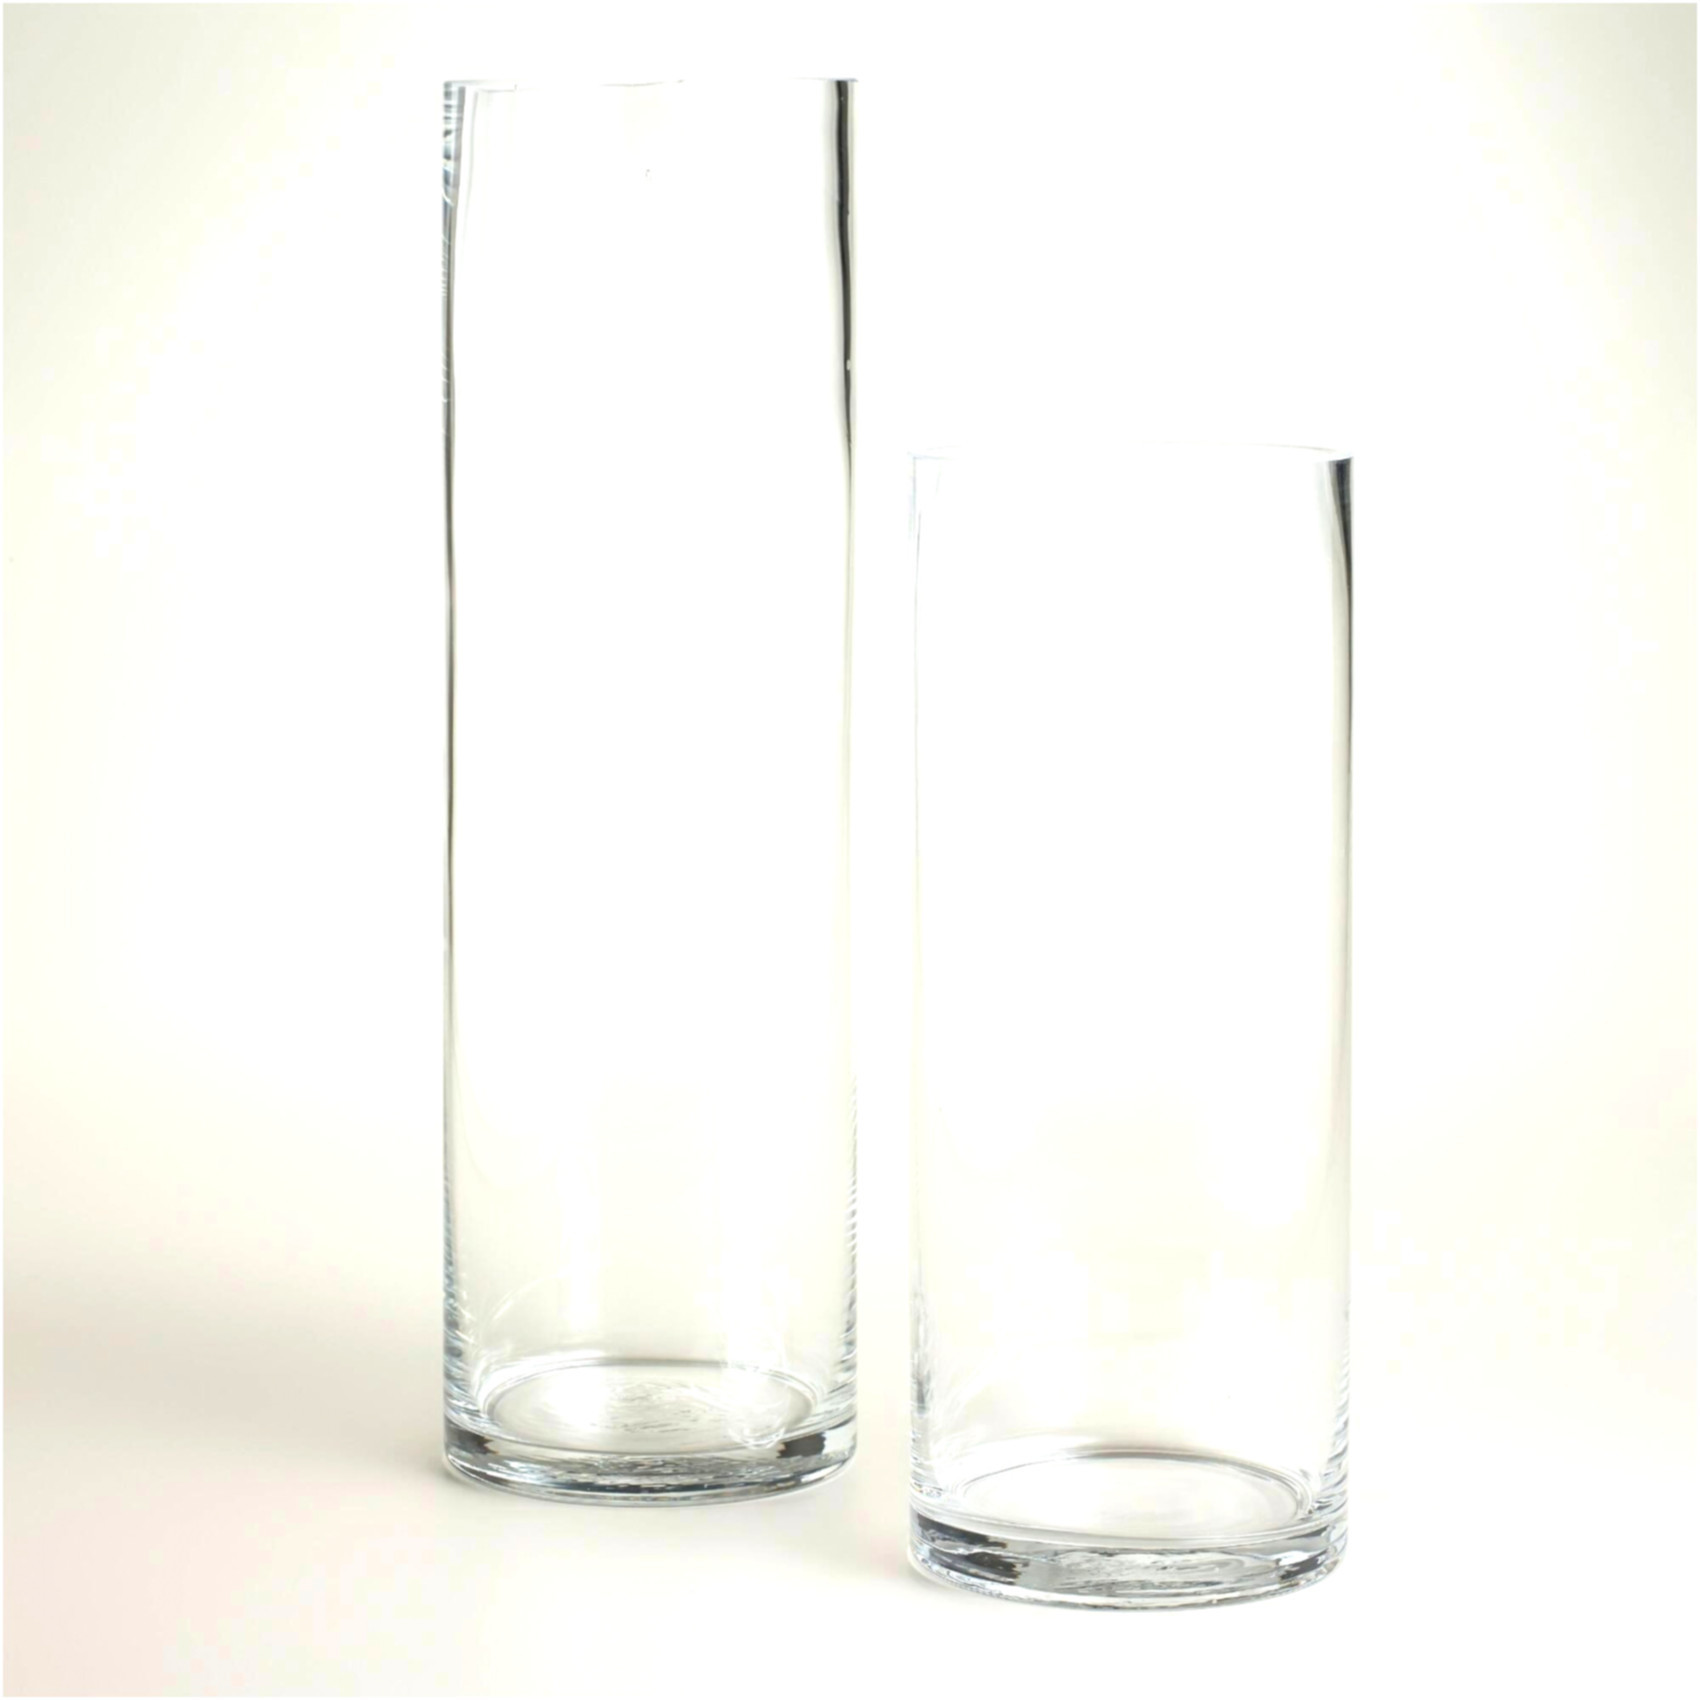 10 attractive Crystal Block Vase 2024 free download crystal block vase of why you should not go to glass vases wholesale glass vases pertaining to crystal glass vases wholesale inspirational 30 elegant vases with